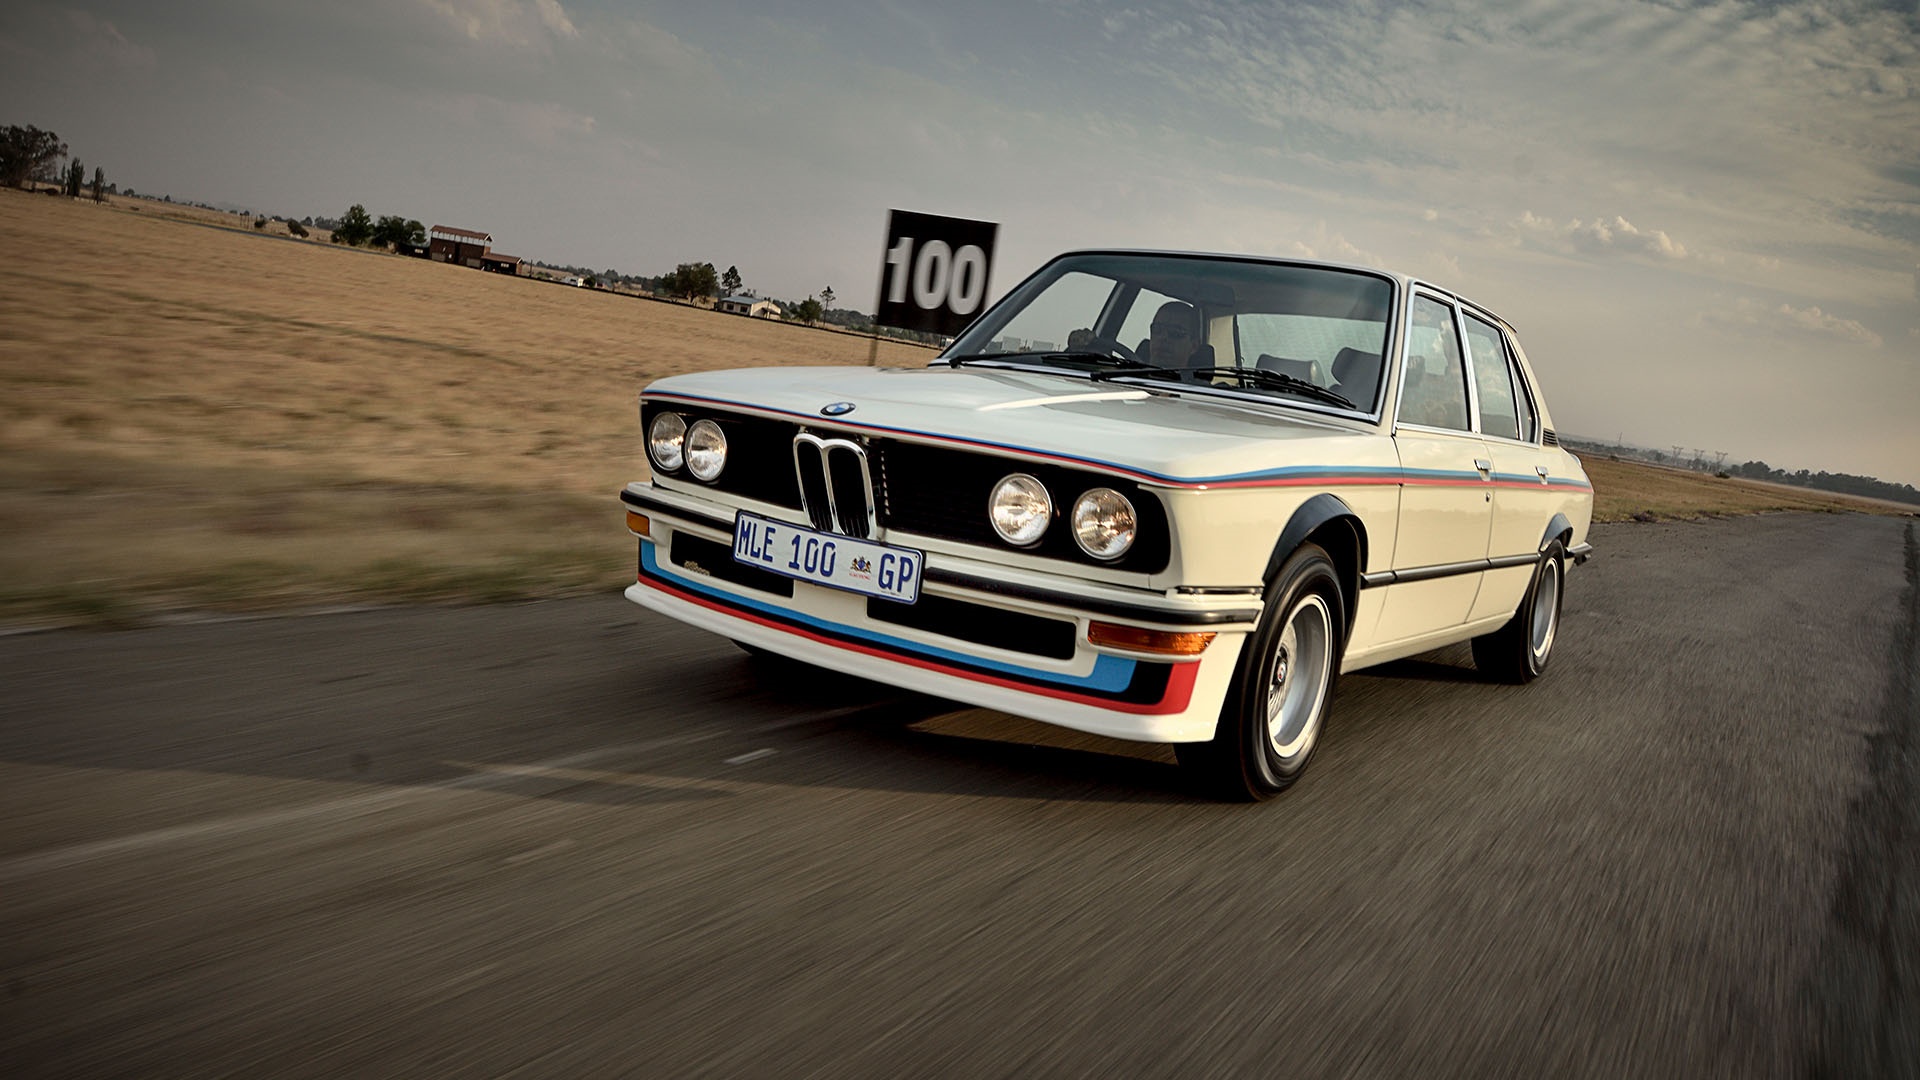 Bmw Old But Never Rusty The Bmw 530 Motorsport Limited Edition Was Built In 1976 In South Africa T Co 9sf3rxjksi Twitter